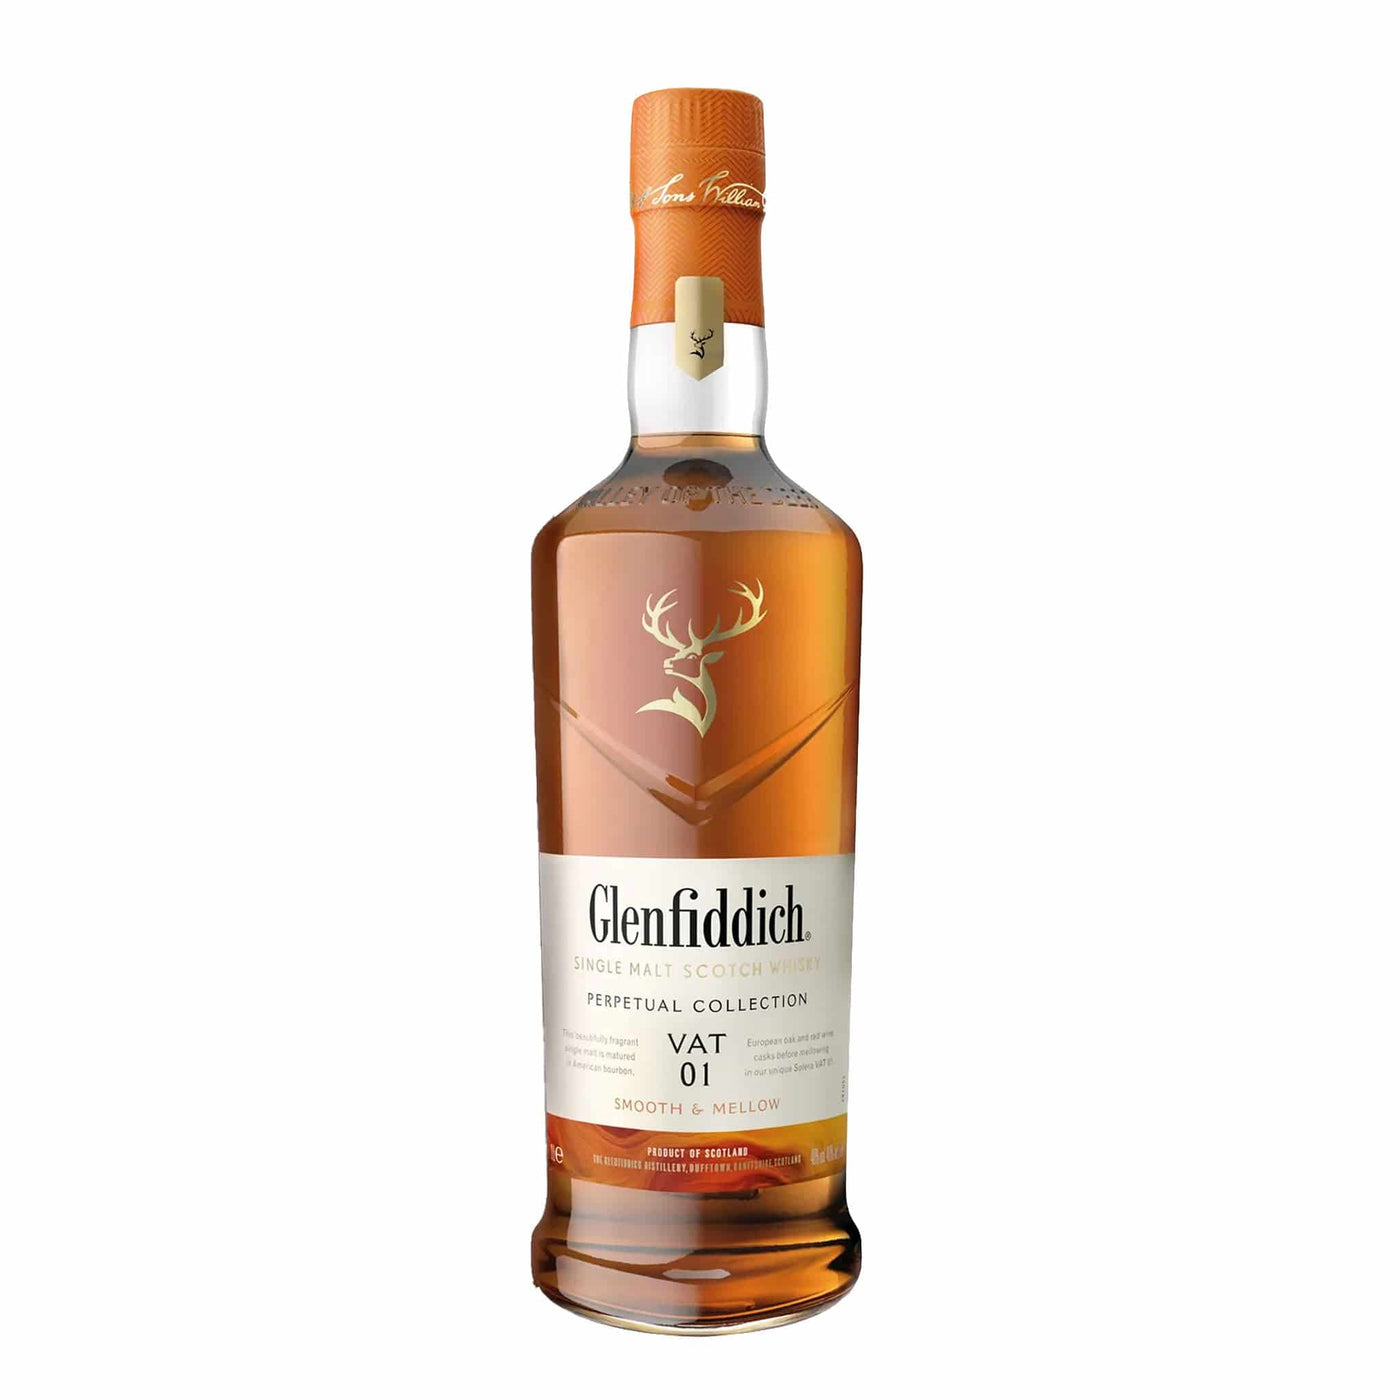 Glenfiddich Perpetual Collection Vat 1 Whisky